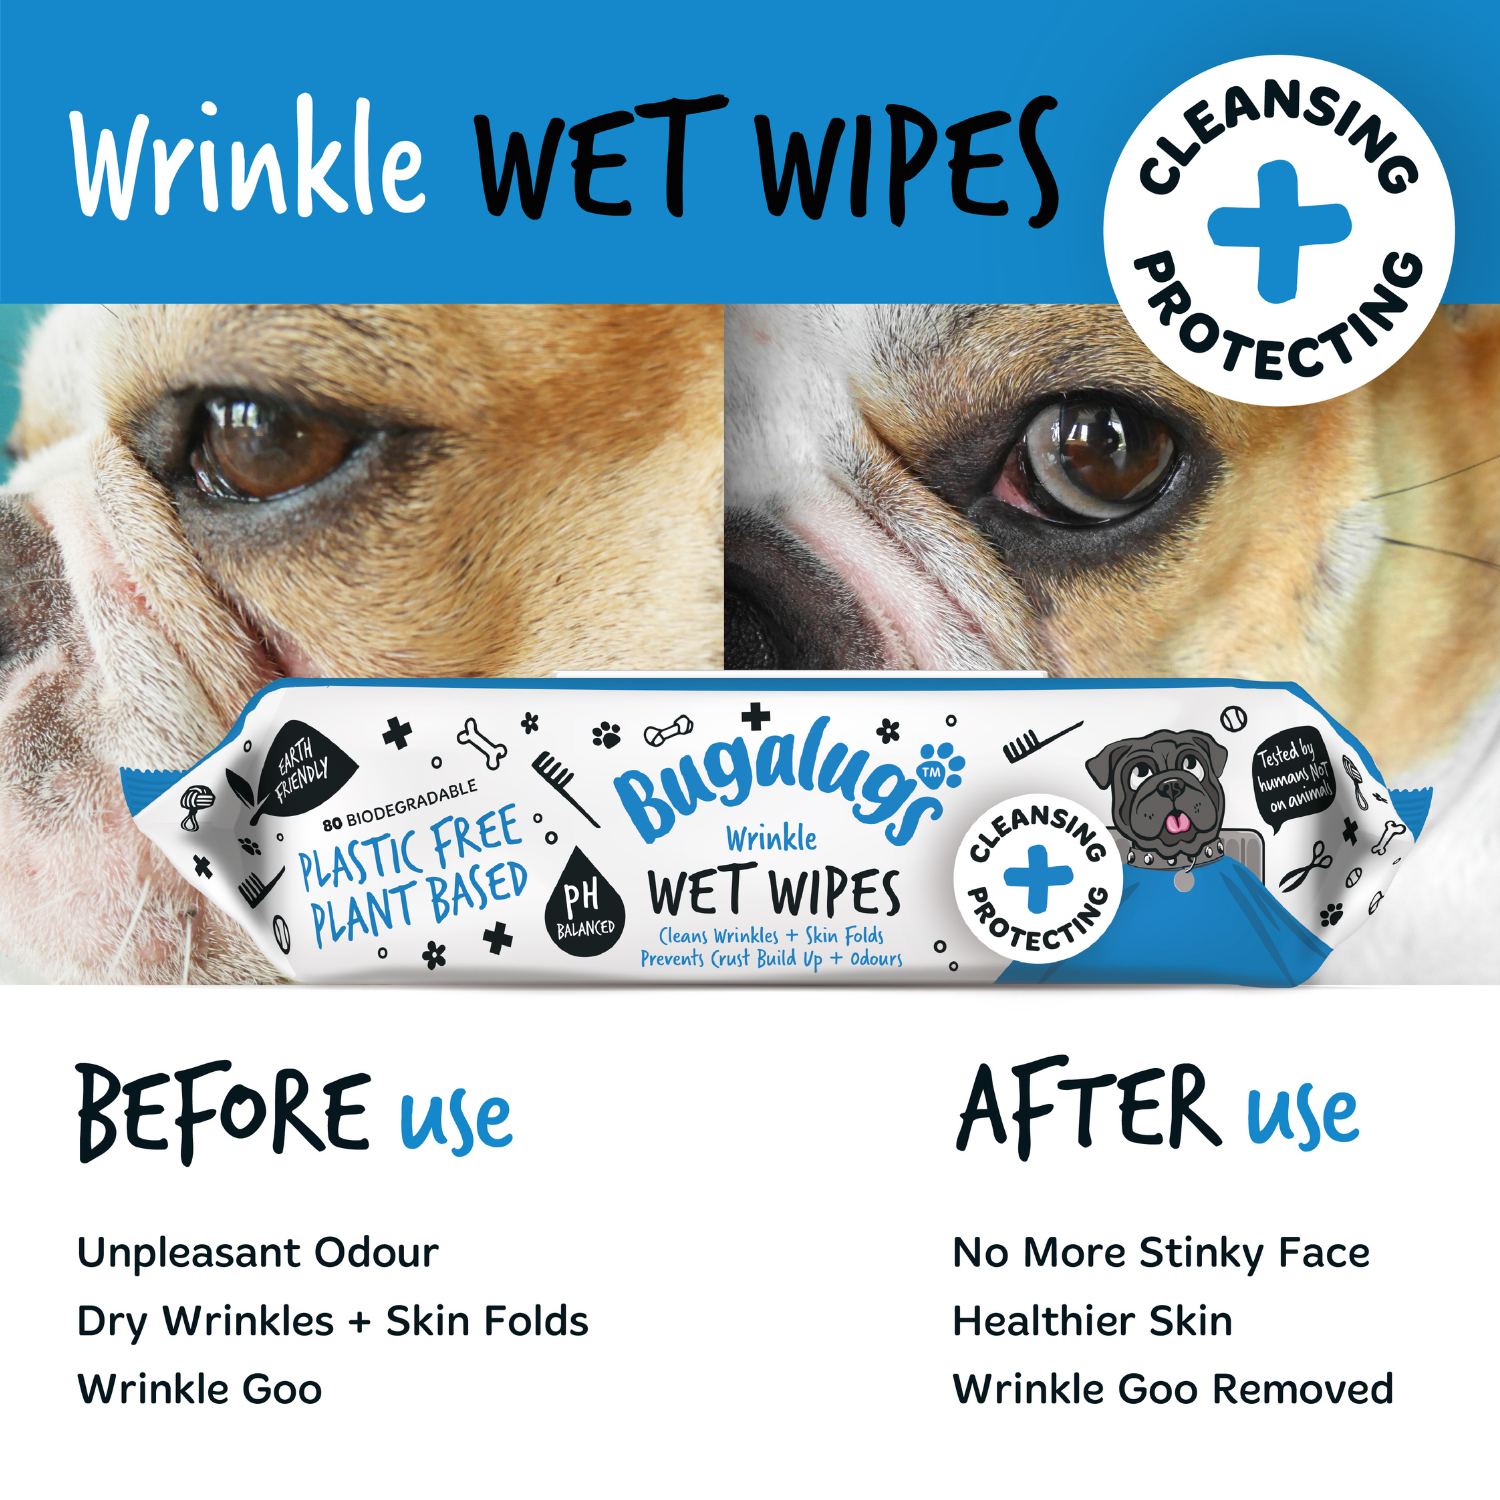 Bugalugs Wrinkle Wet Wipes for Dogs and Cats - Before and after use